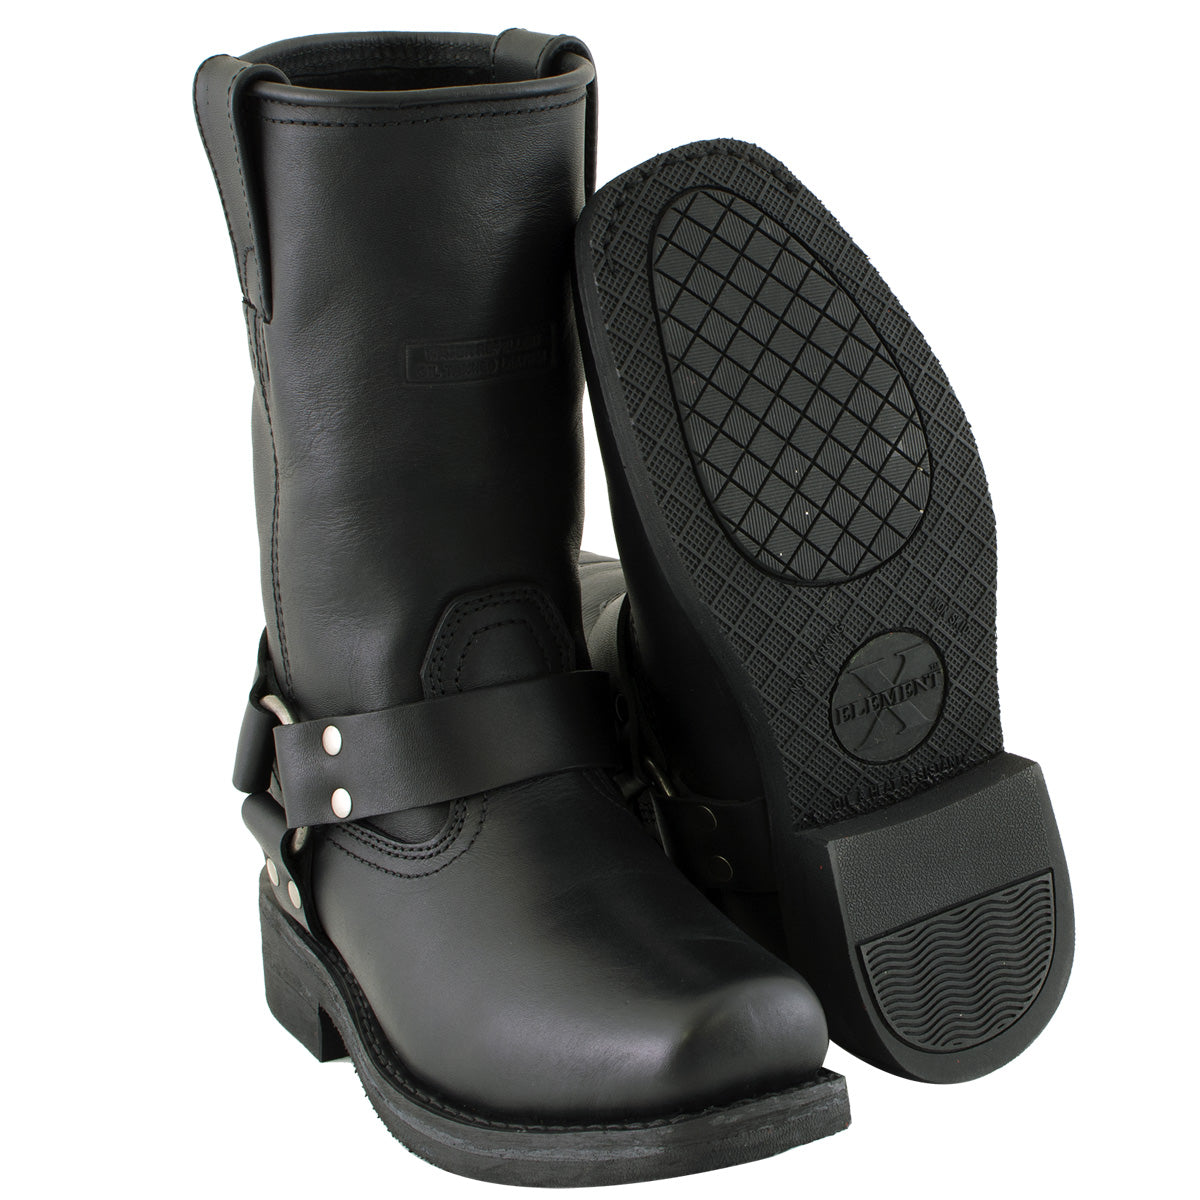 Xelement 2442 Women's Black 'Classic' Full Grain Leather Harness Motorcycle Rider Boots